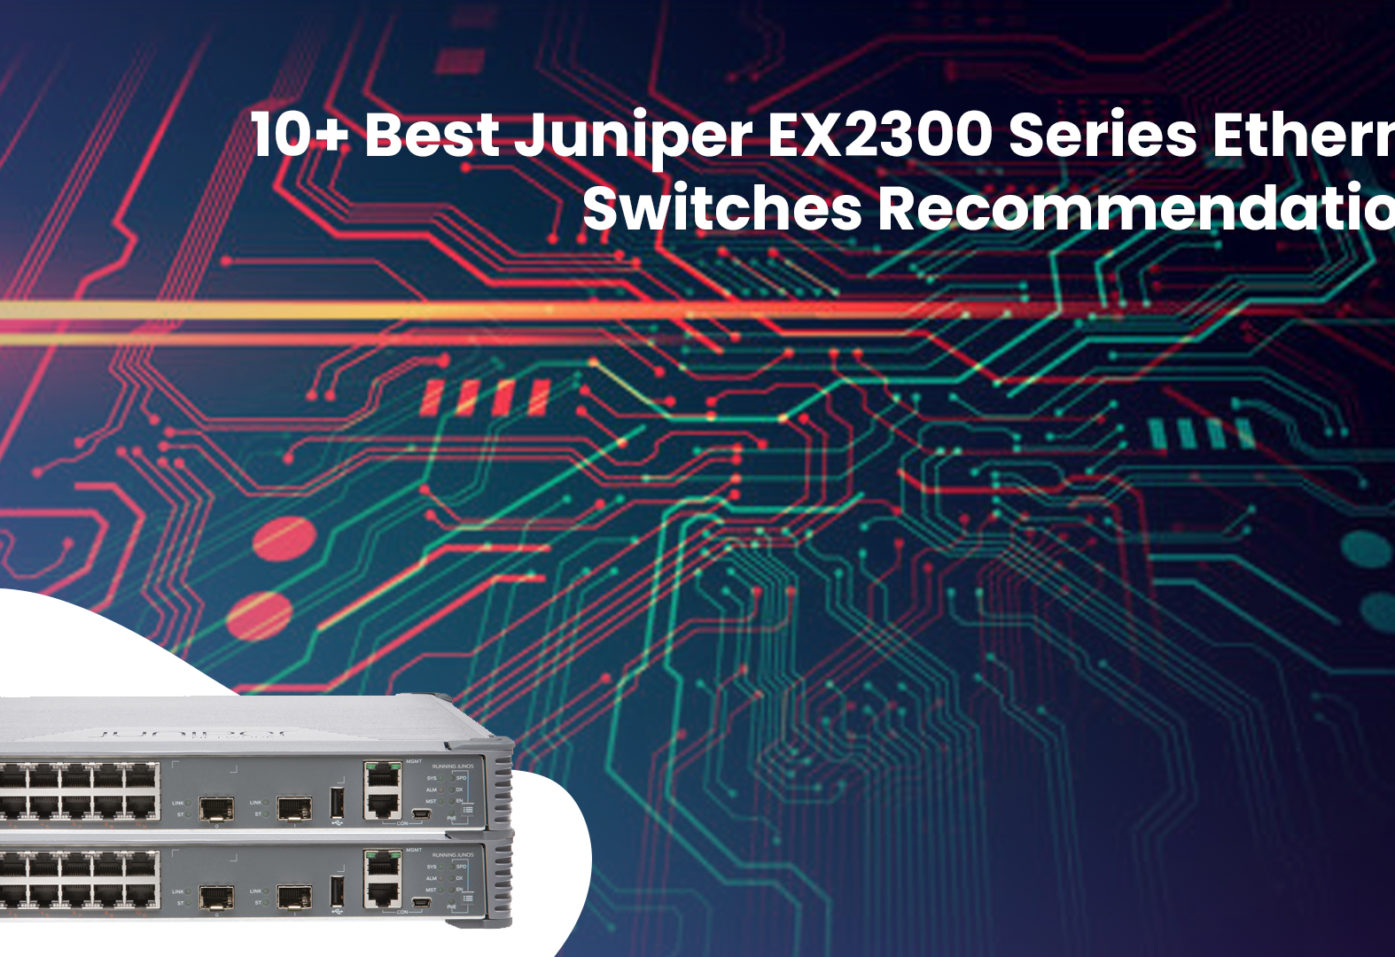 10+ Best Juniper EX2300 Series Ethernet switches Recommendations